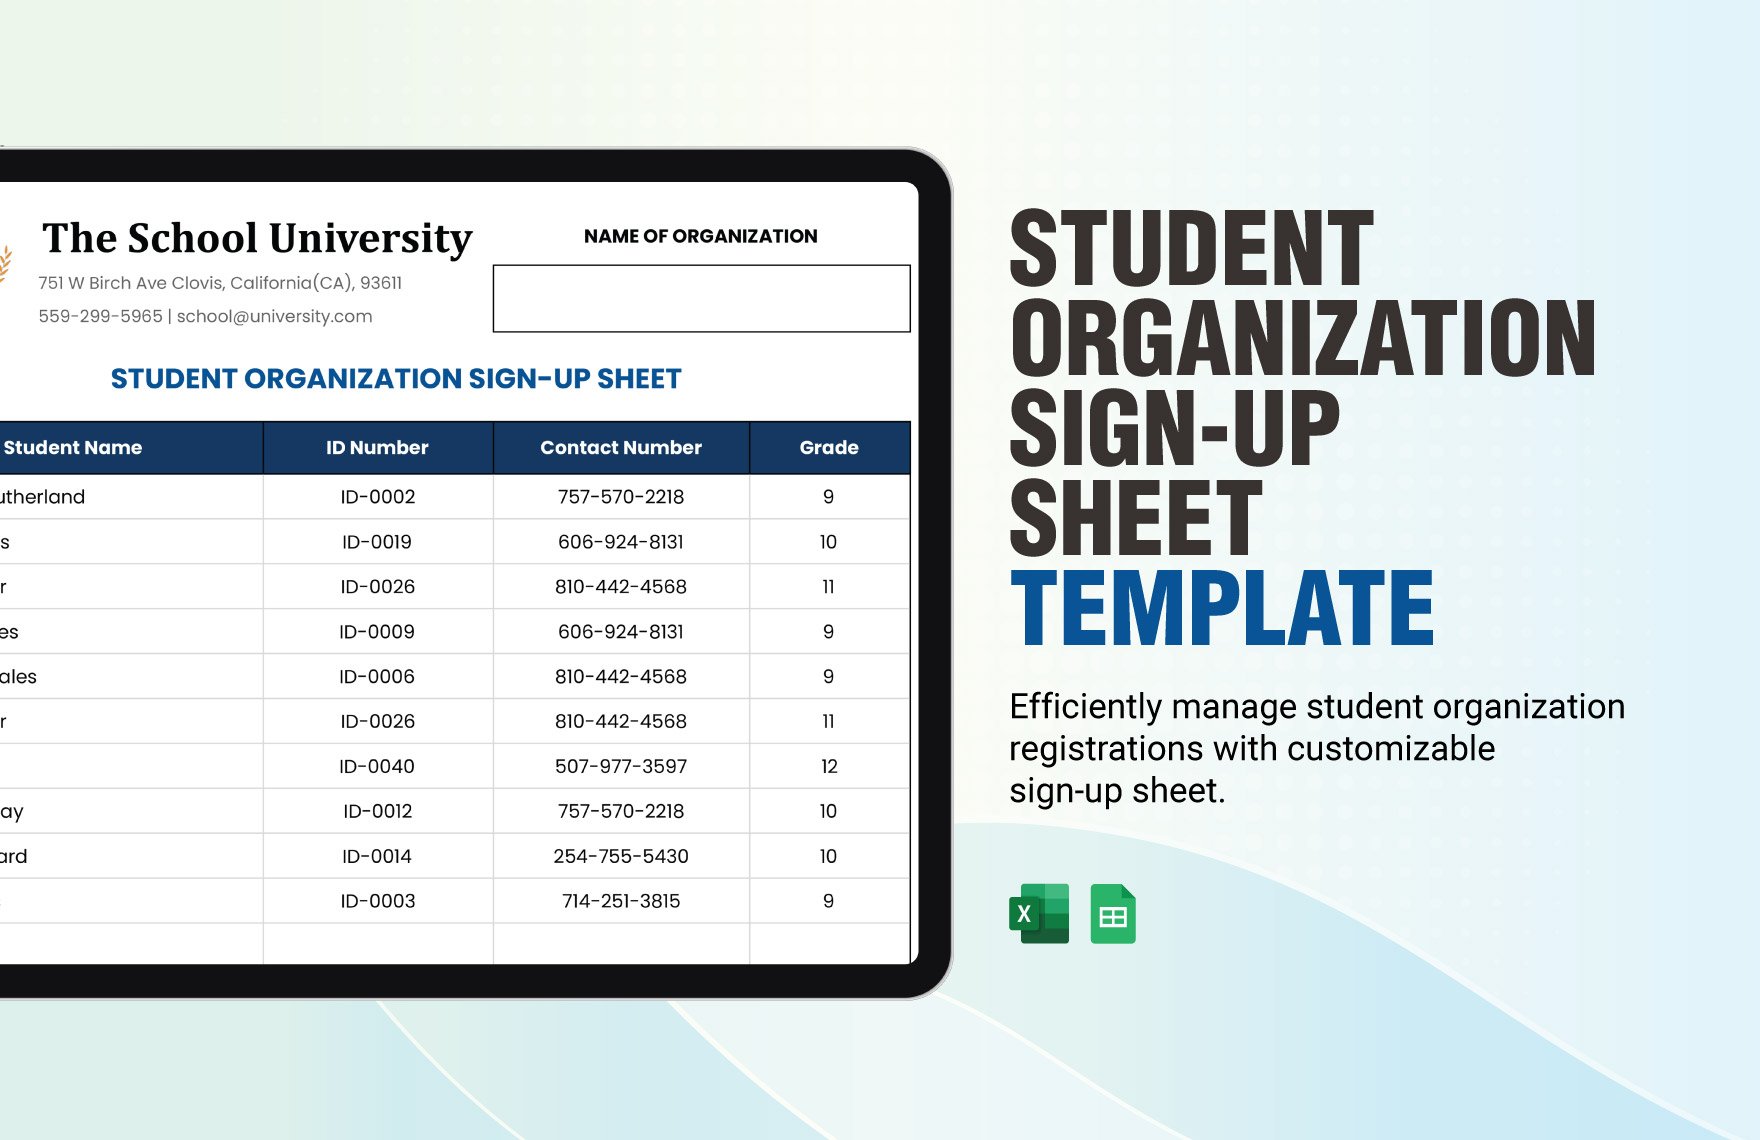 Student Organization Sign-up Sheet Template in Excel, Google Sheets